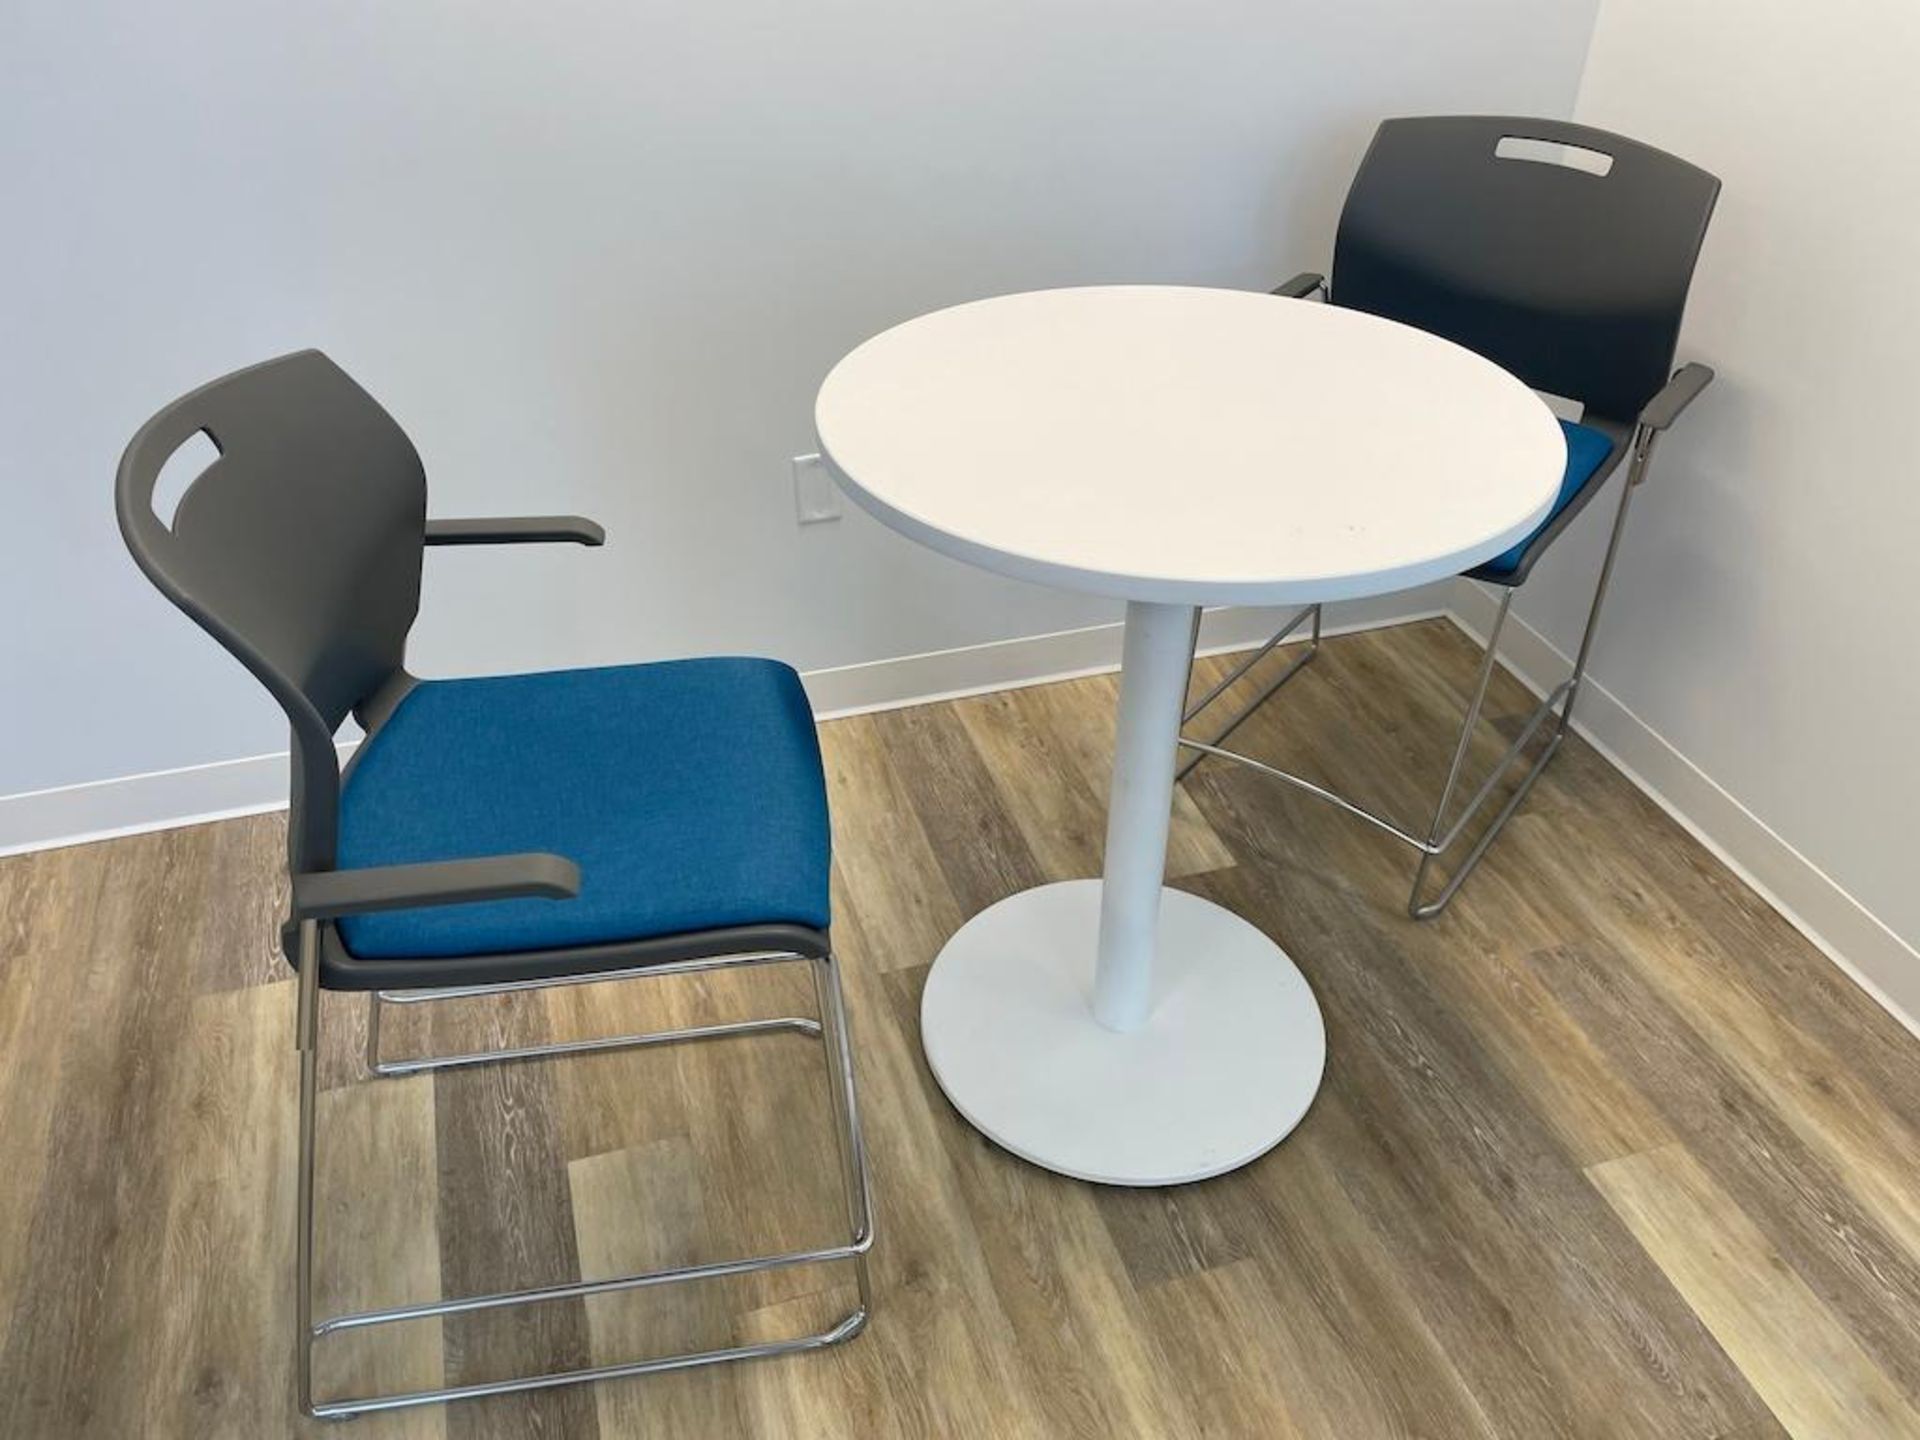 LOT (2) HIGH TOP 2.5 FT DIA ROUND TABLES, (4) HIGH STOOLS [2ND FL OFFICE]